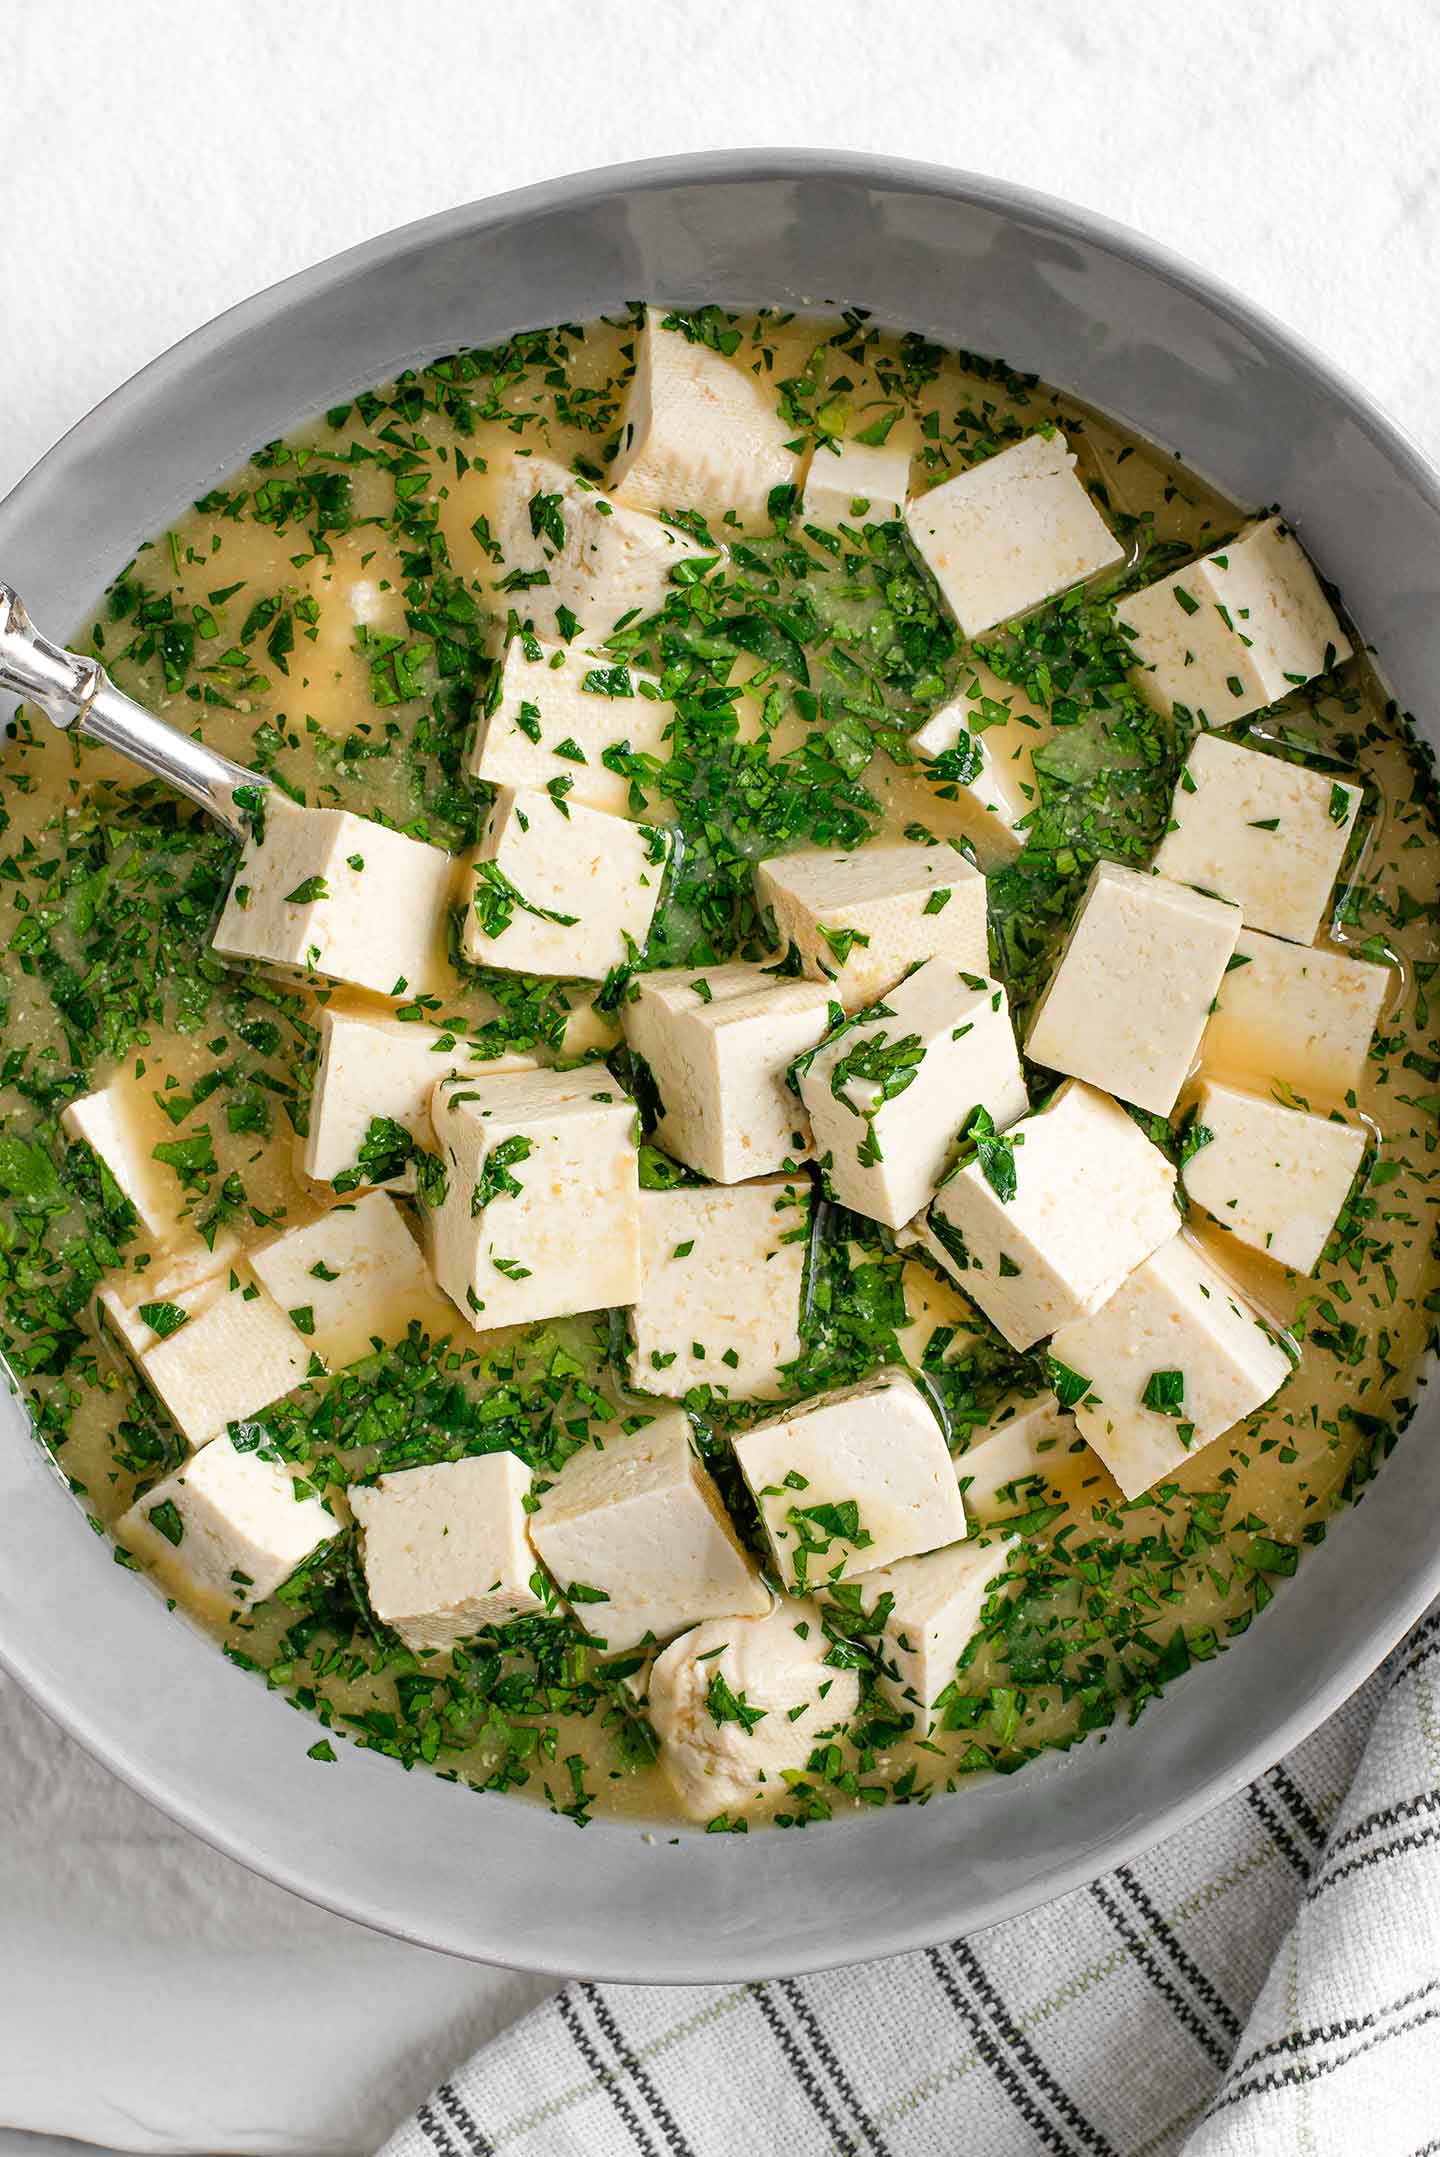 Top down view of quick and easy feta in a bowl with marinade and chopped parsley. A spoon sits in the middle of the feta cubes.